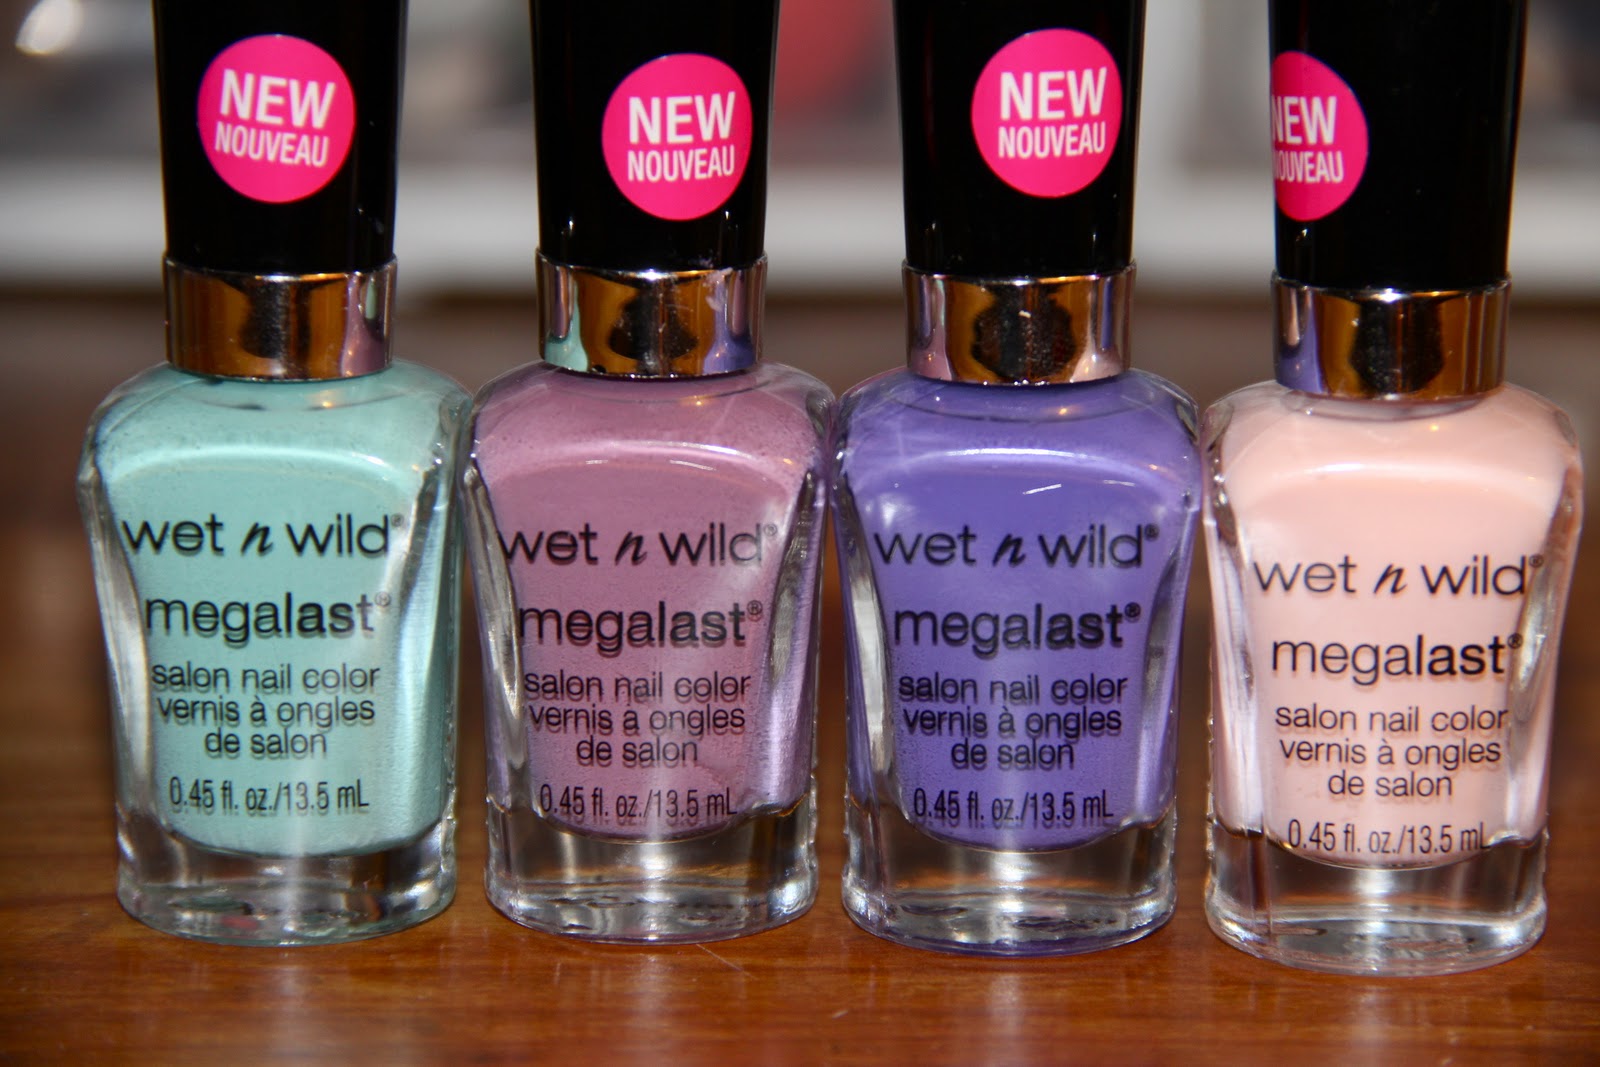 Wet n Wild Megalast Nail Polish in "Through the Grapevine" - wide 1